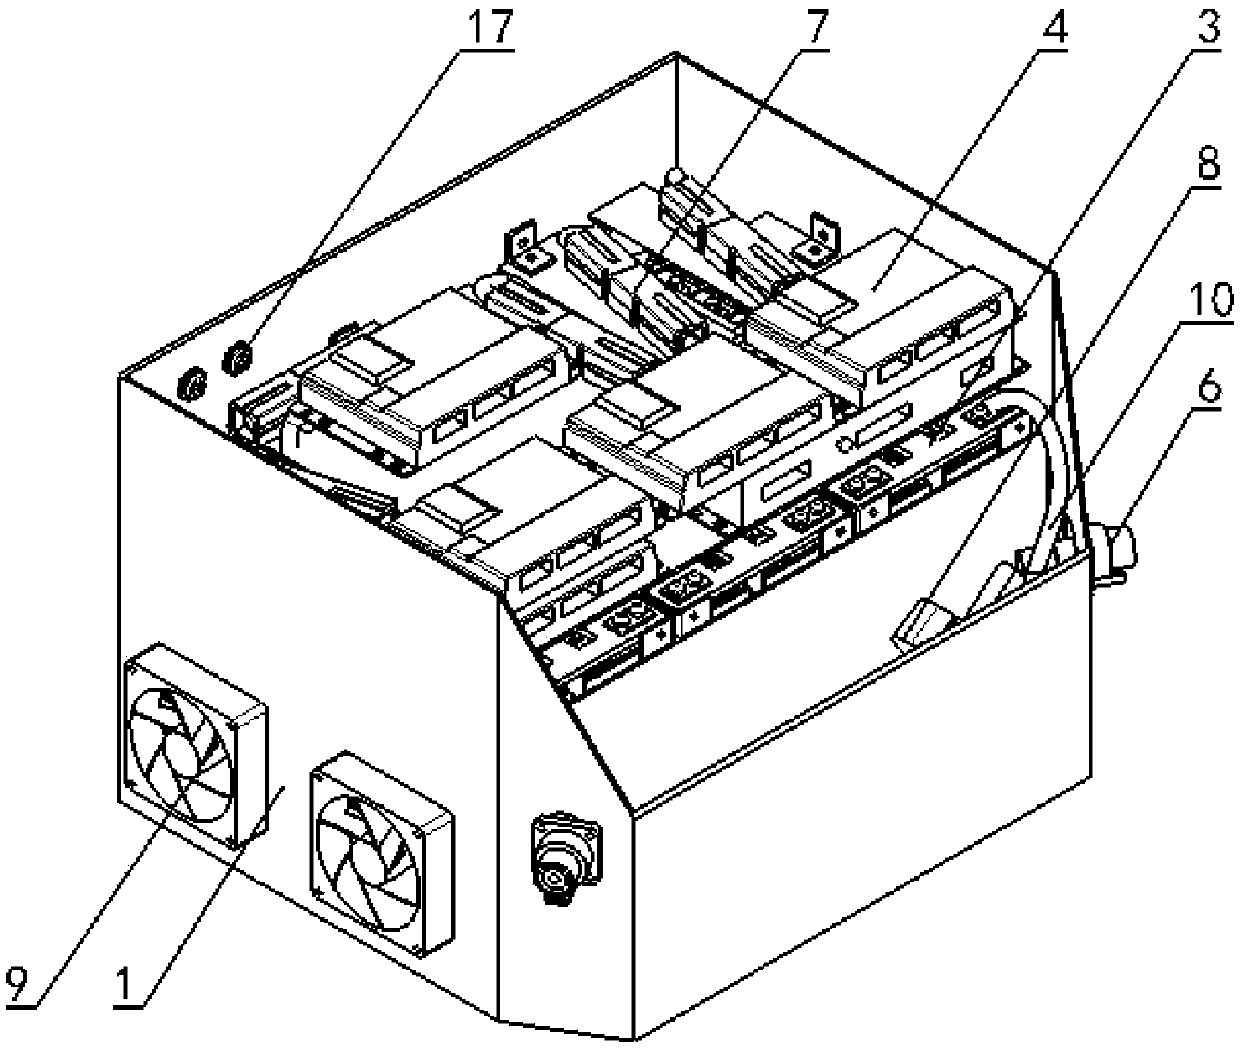 Novel driving battery box for electric vehicle